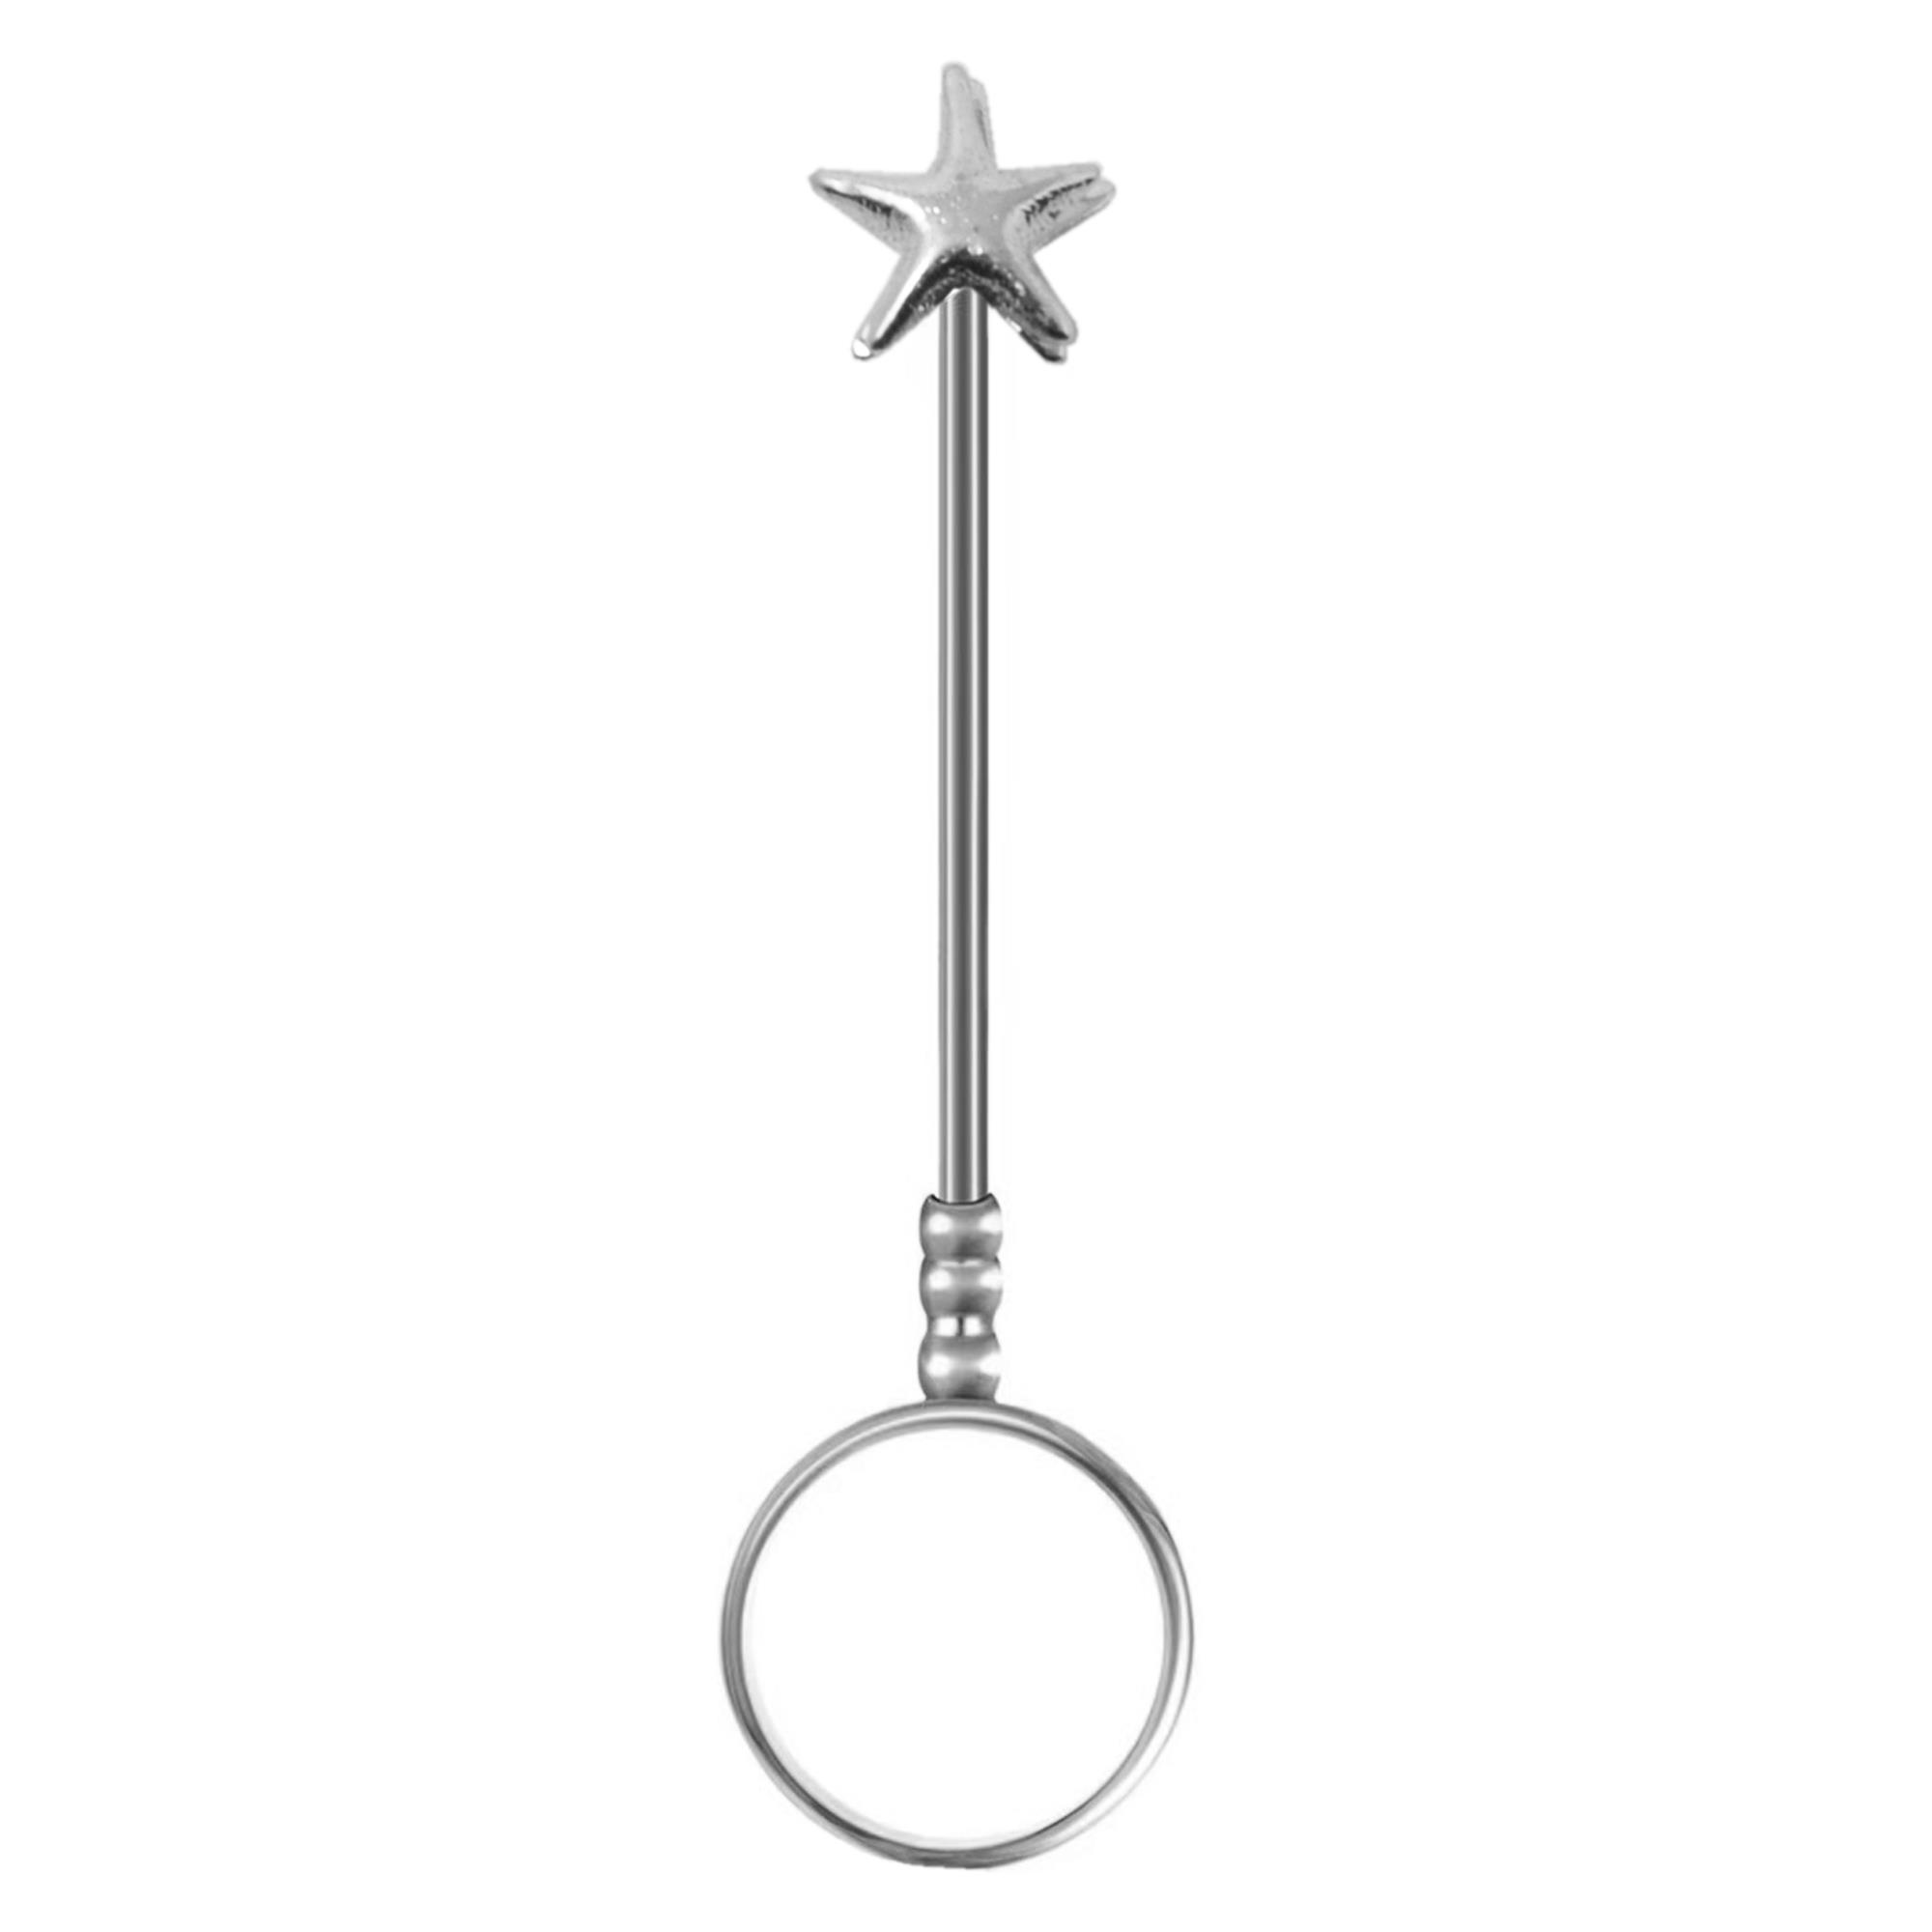 THE STAR TREATMENT SILVER JOINT HOLDER